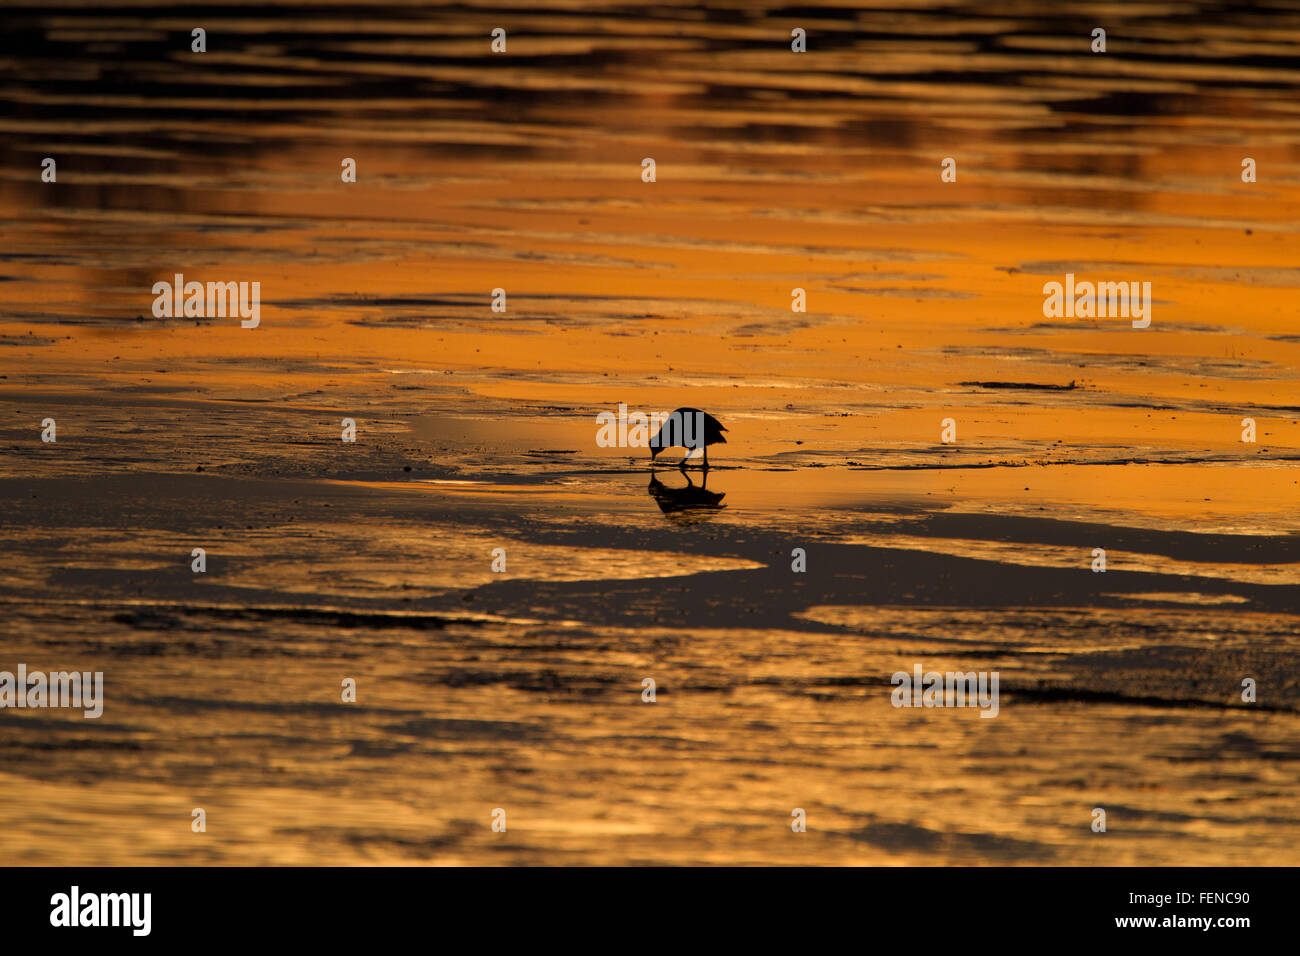 Coot in silhouette, walking on ice, against sunset reflections on ice, Stock Photo